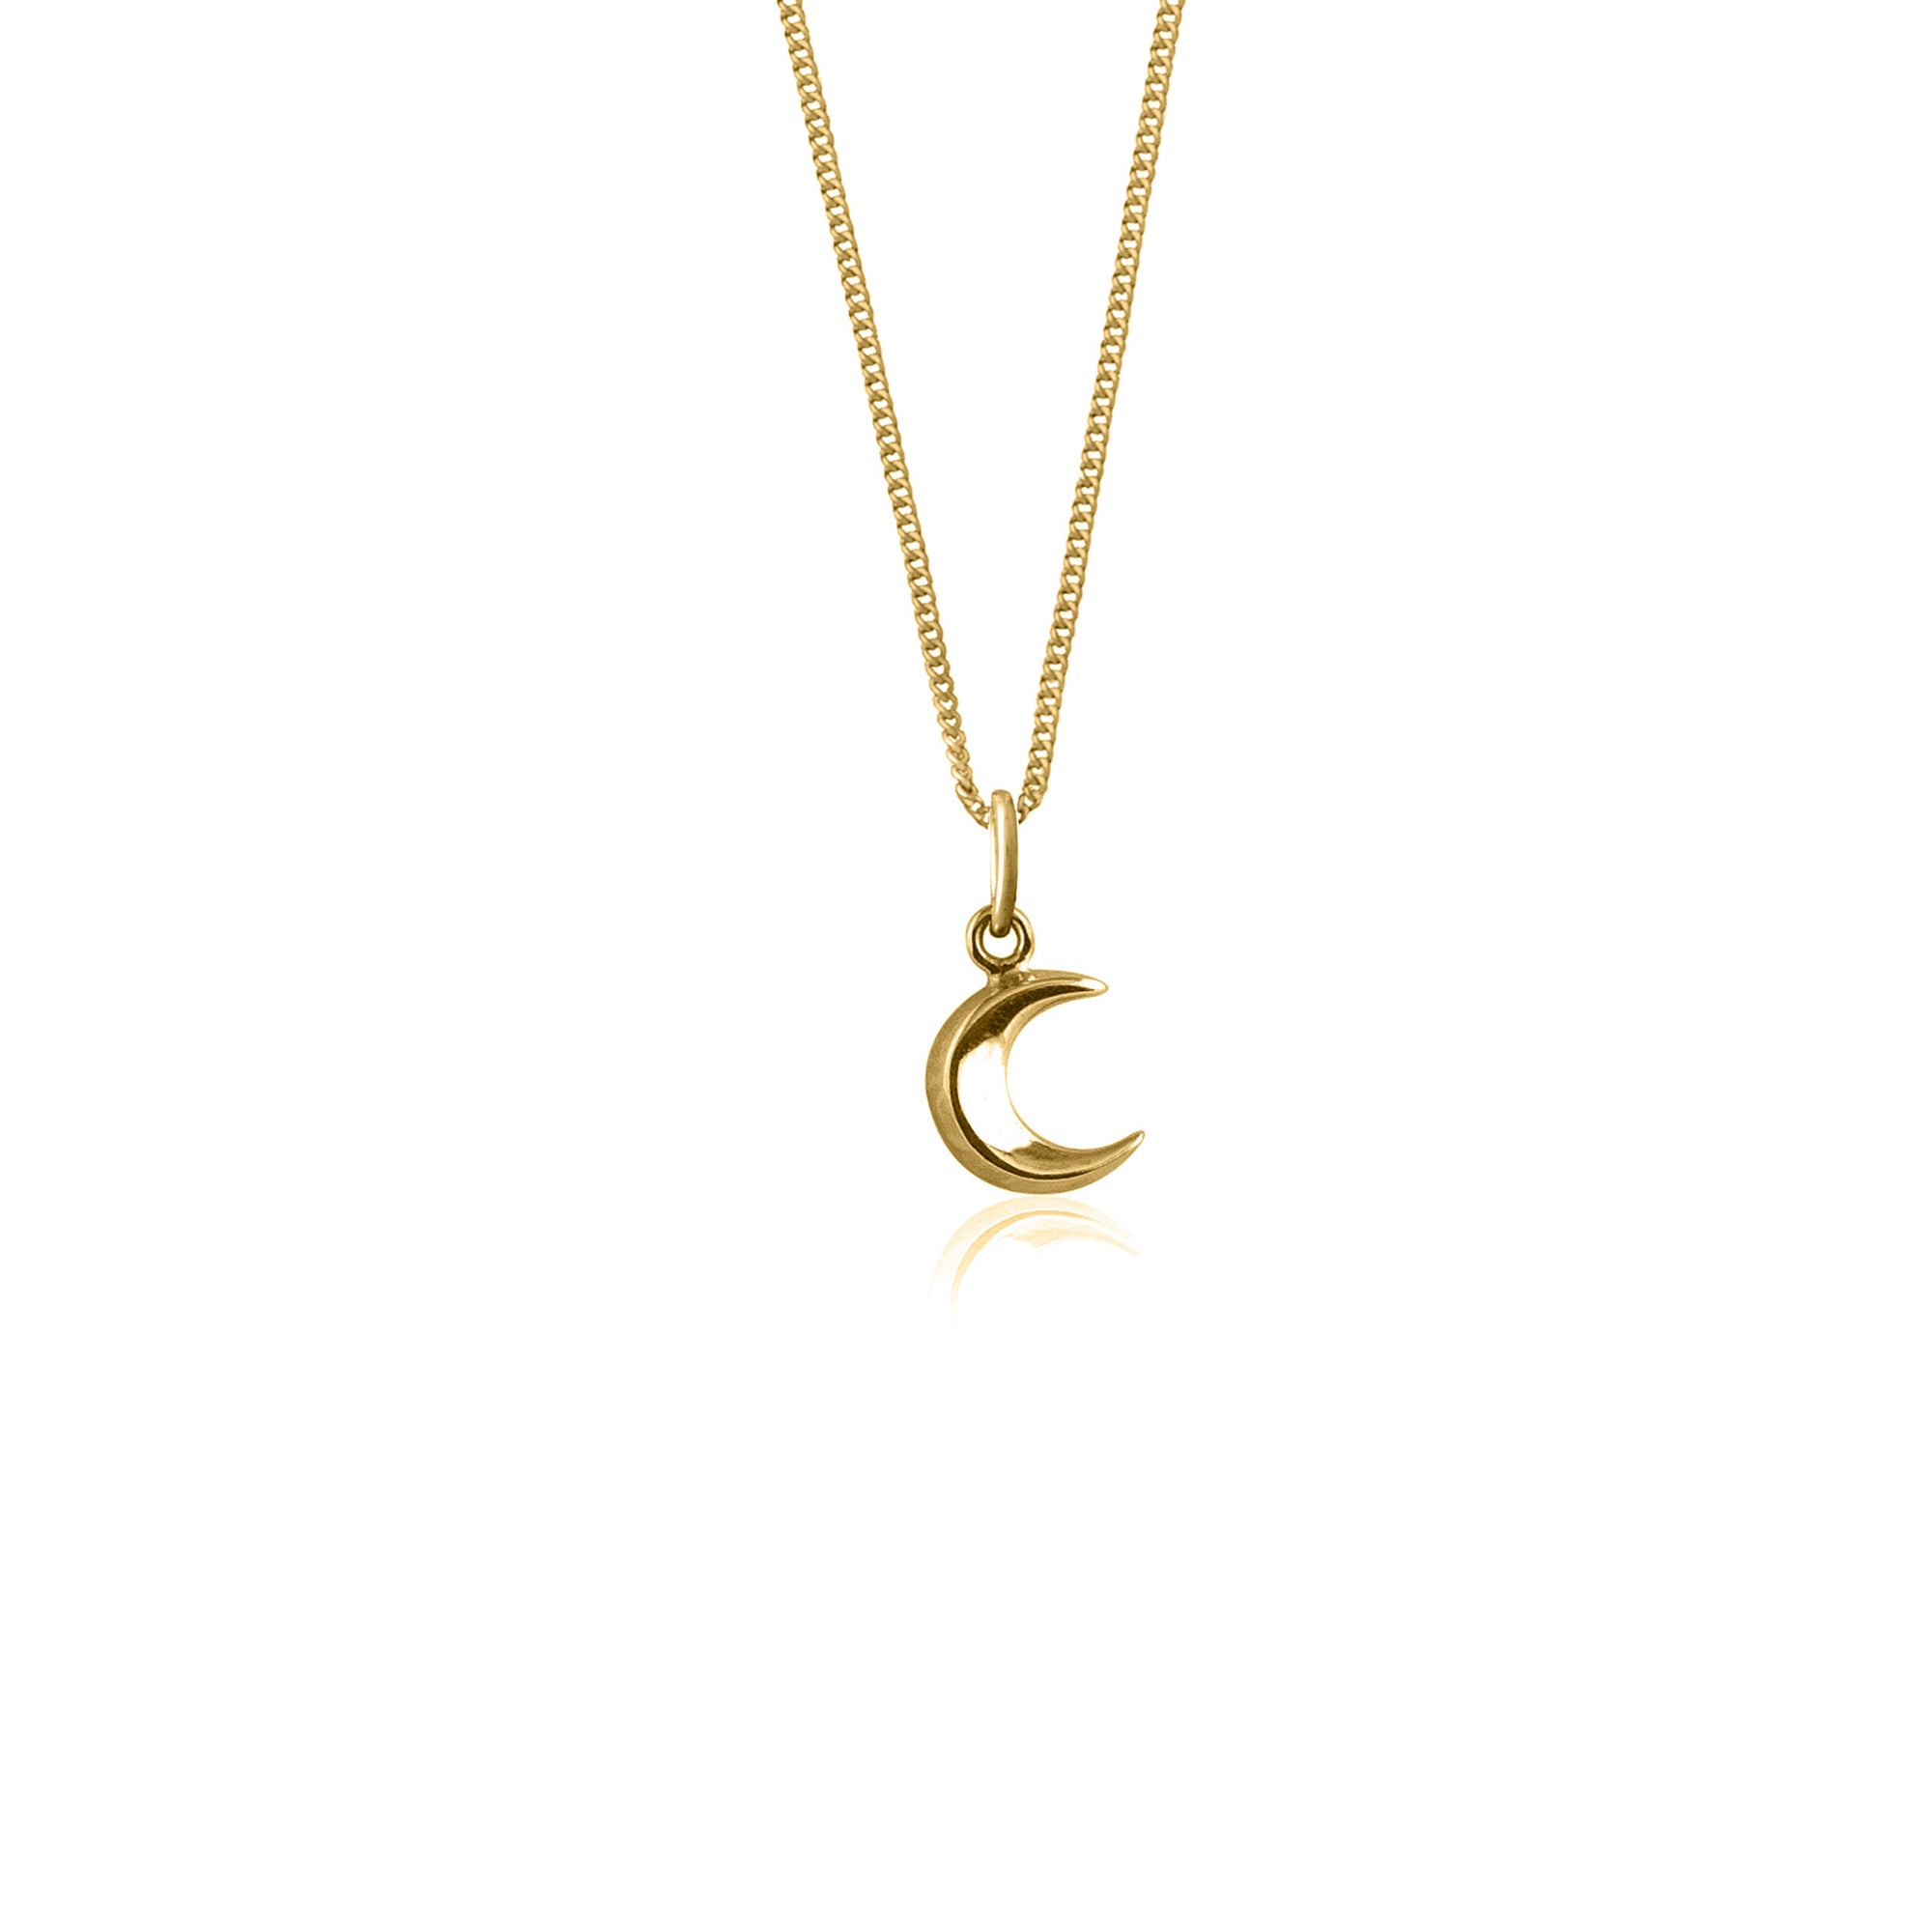 Luna & Rose - To The Moon and Back Charm Necklace in Gold